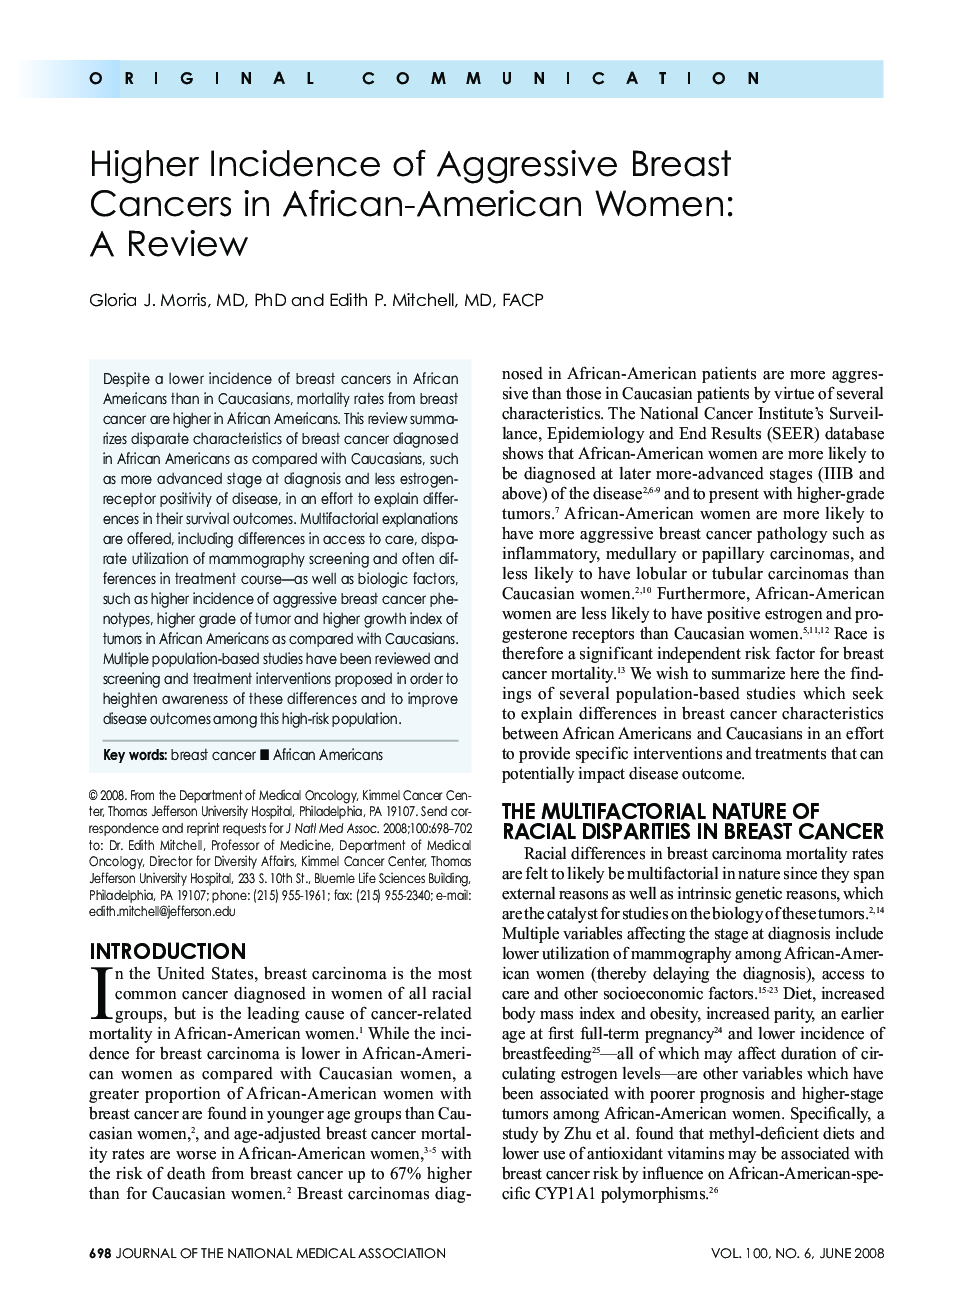 Higher Incidence of Aggressive Breast Cancers in African-American Women: A Review